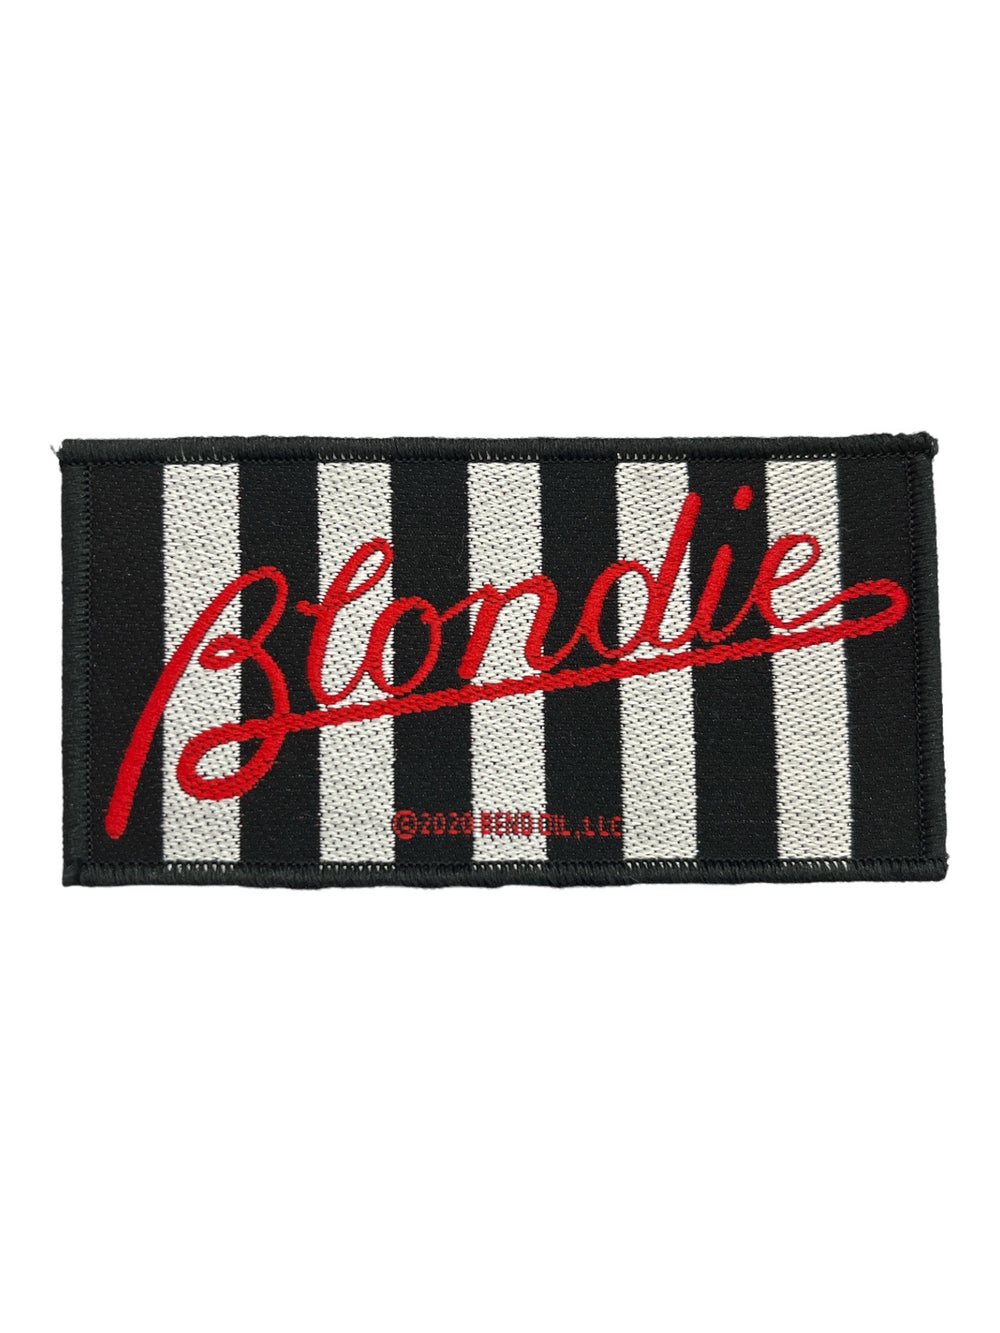 Blondie Stripped Logo Official Woven Patch Brand New